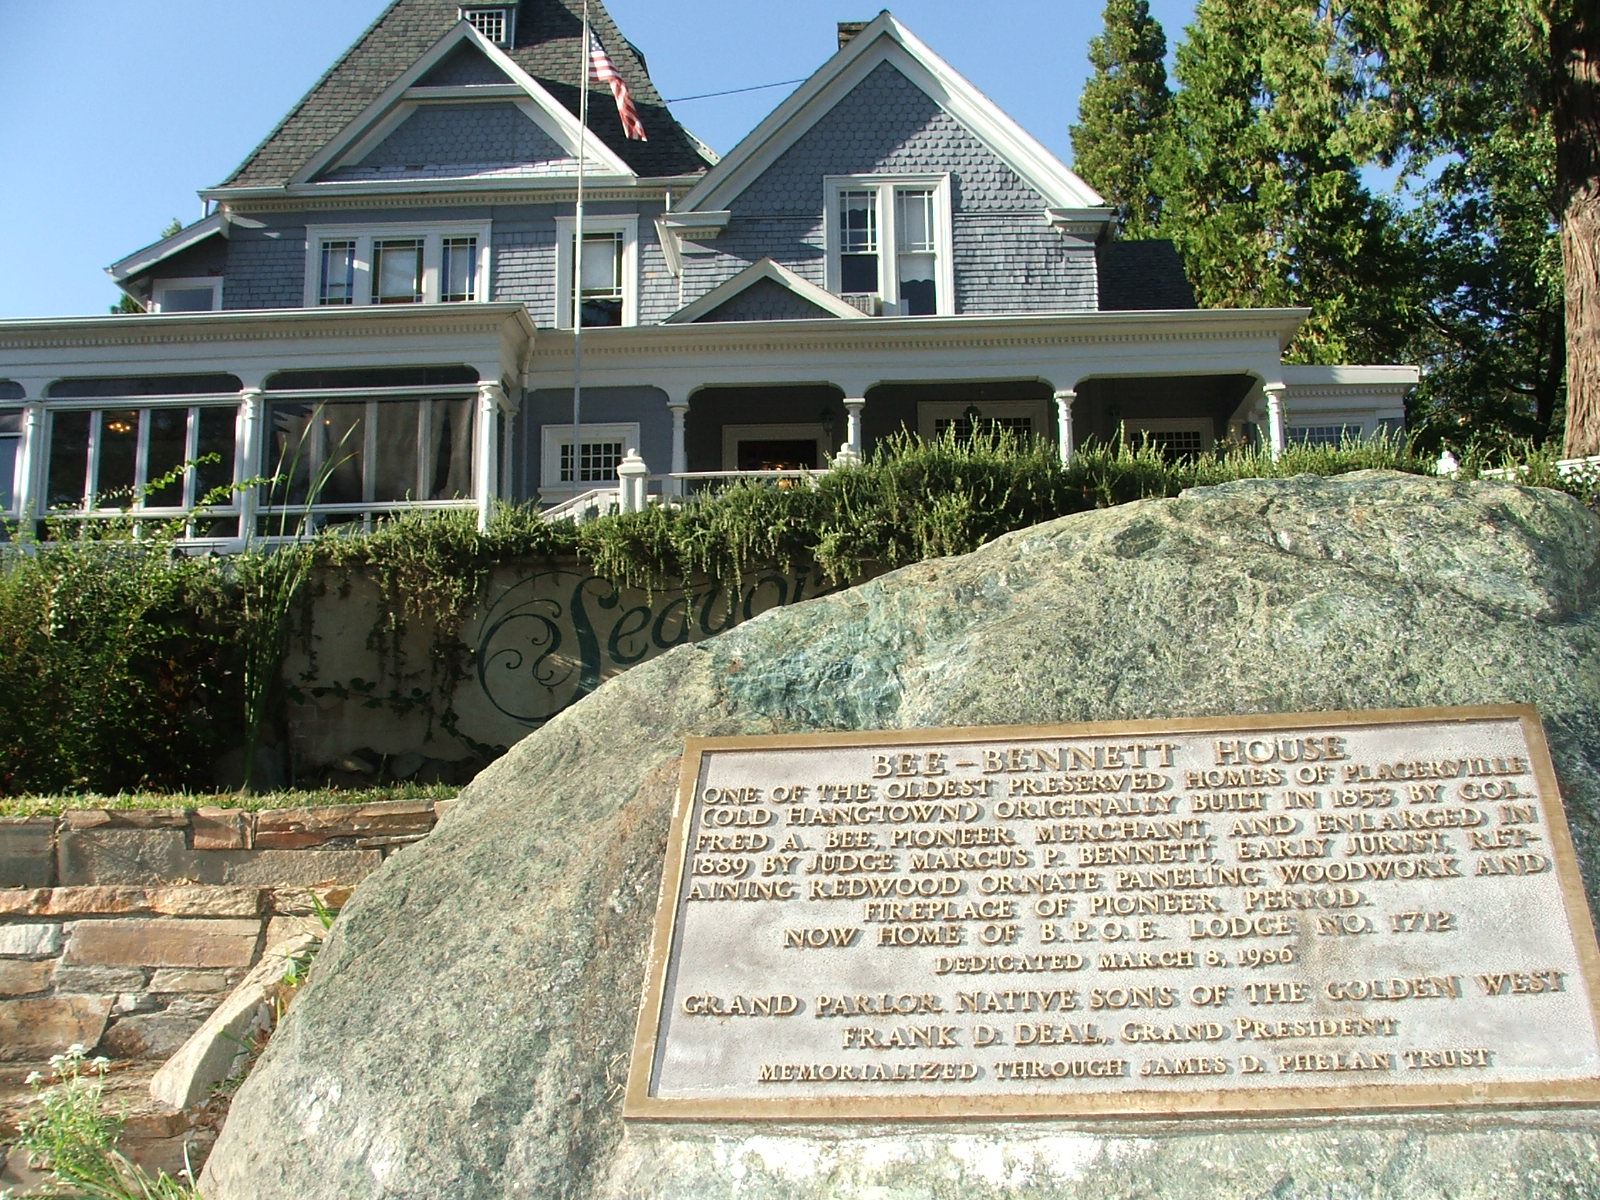 Sequoia Mansion - Bee Bennett House with historic plaque